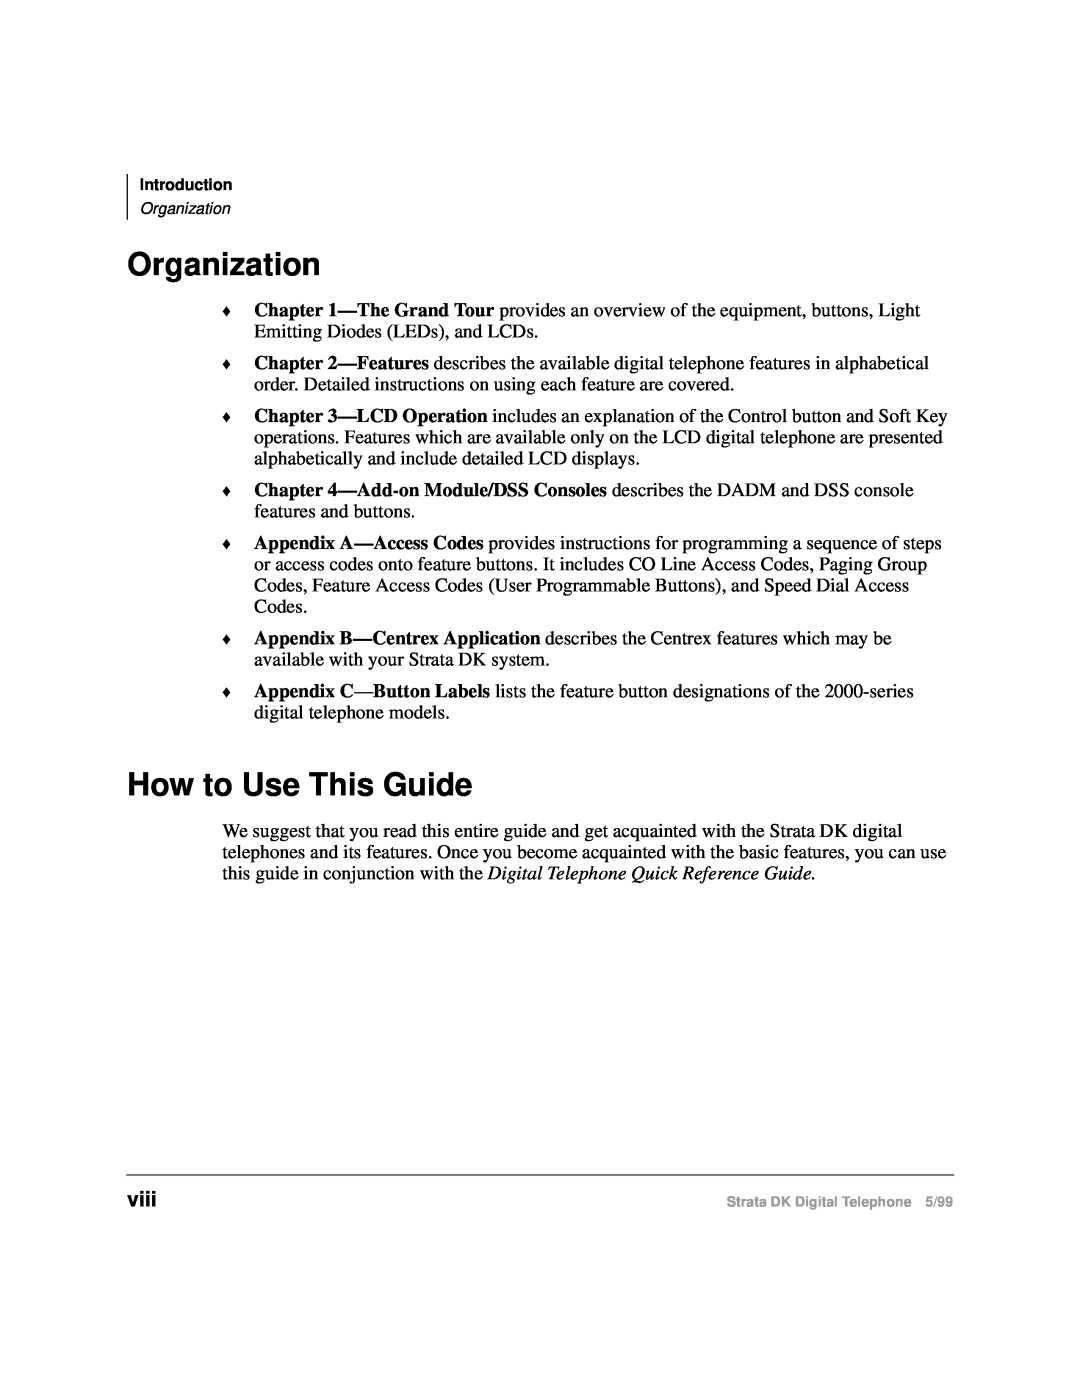 Toshiba CT manual Organization, How to Use This Guide, viii, Introduction 